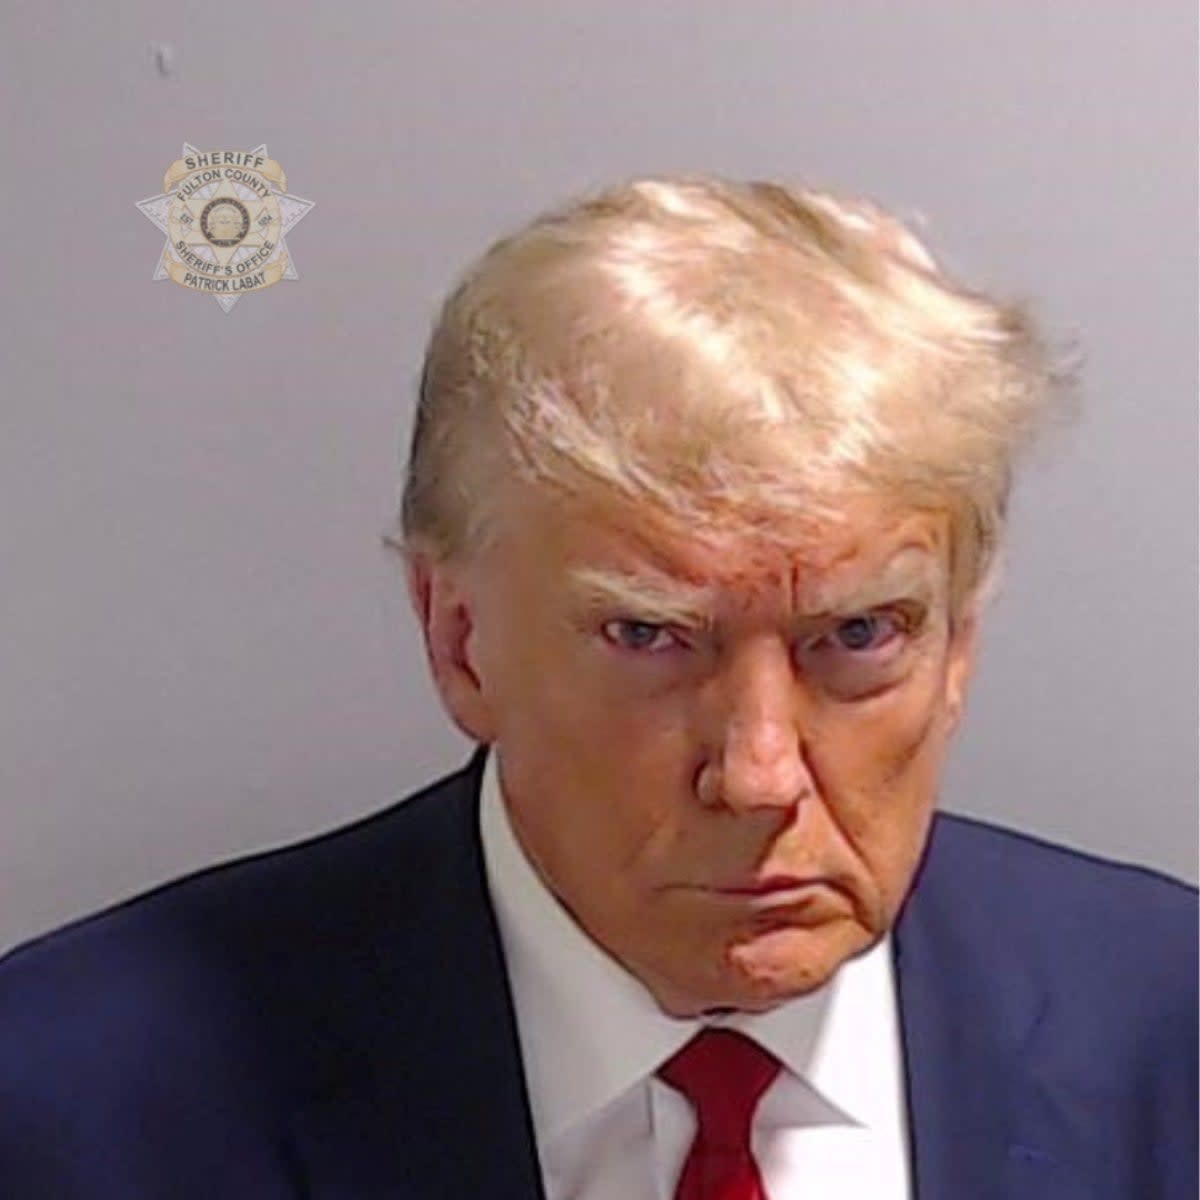 Donald Trump’s police booking mugshot released by the Fulton County Sheriff’s Office (via REUTERS)